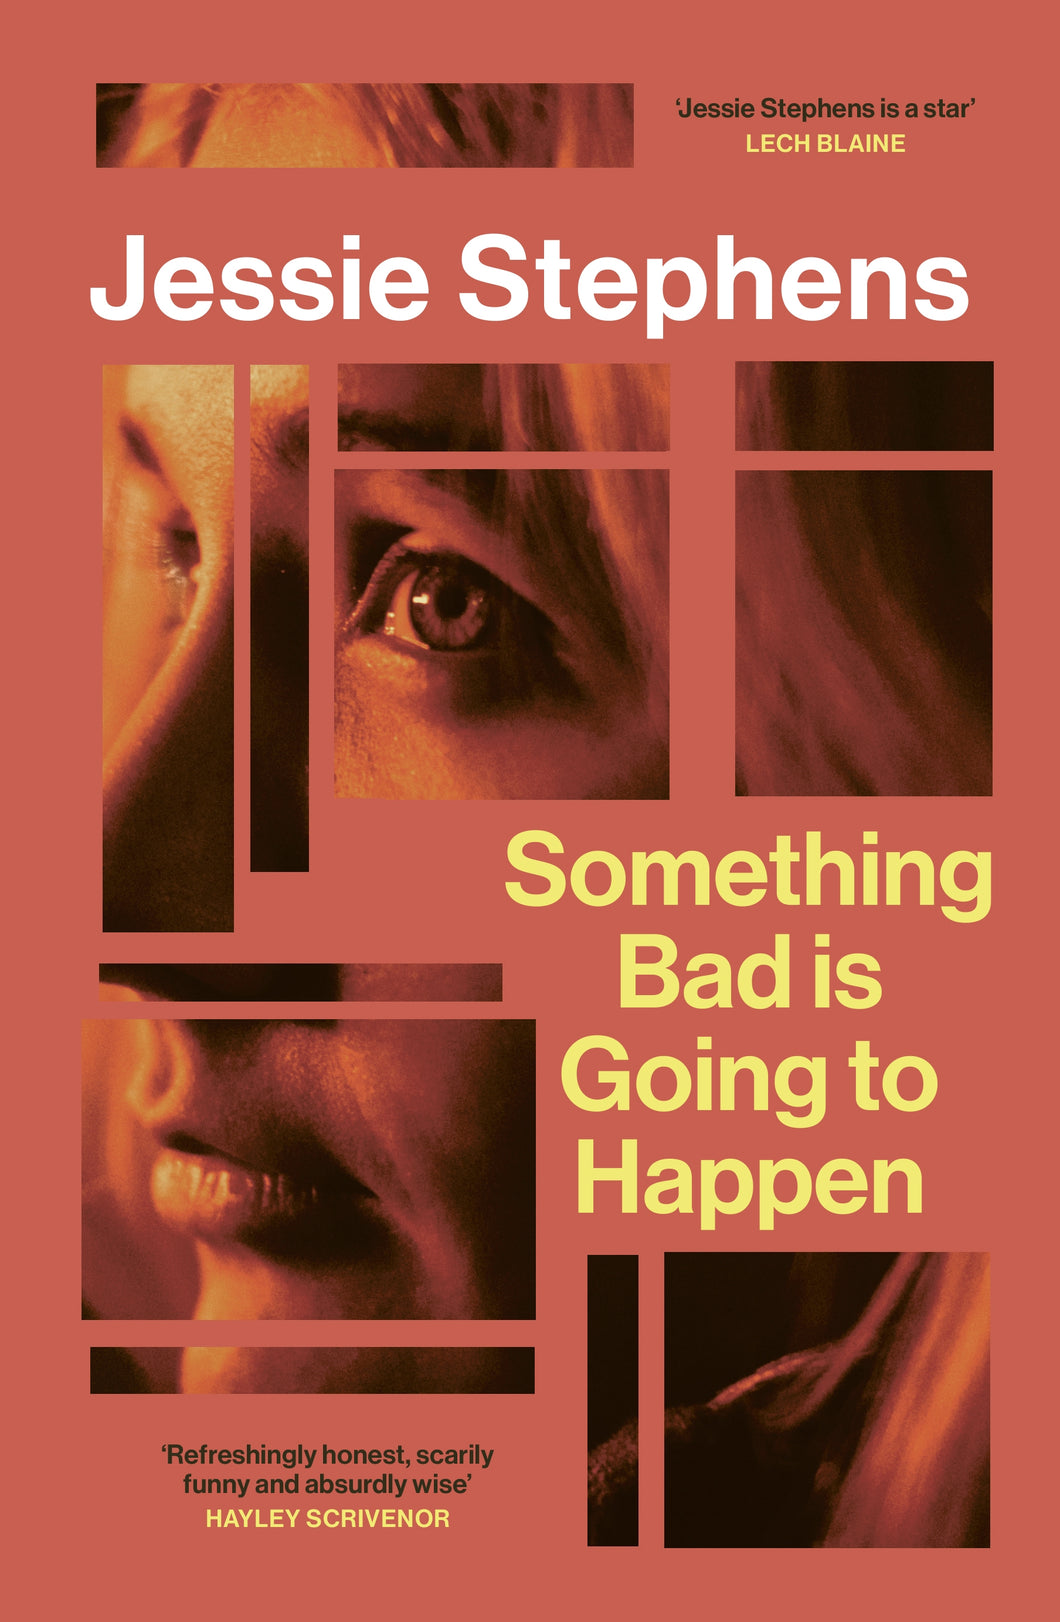 Something Bad is Going to Happen by Jessie Stephens